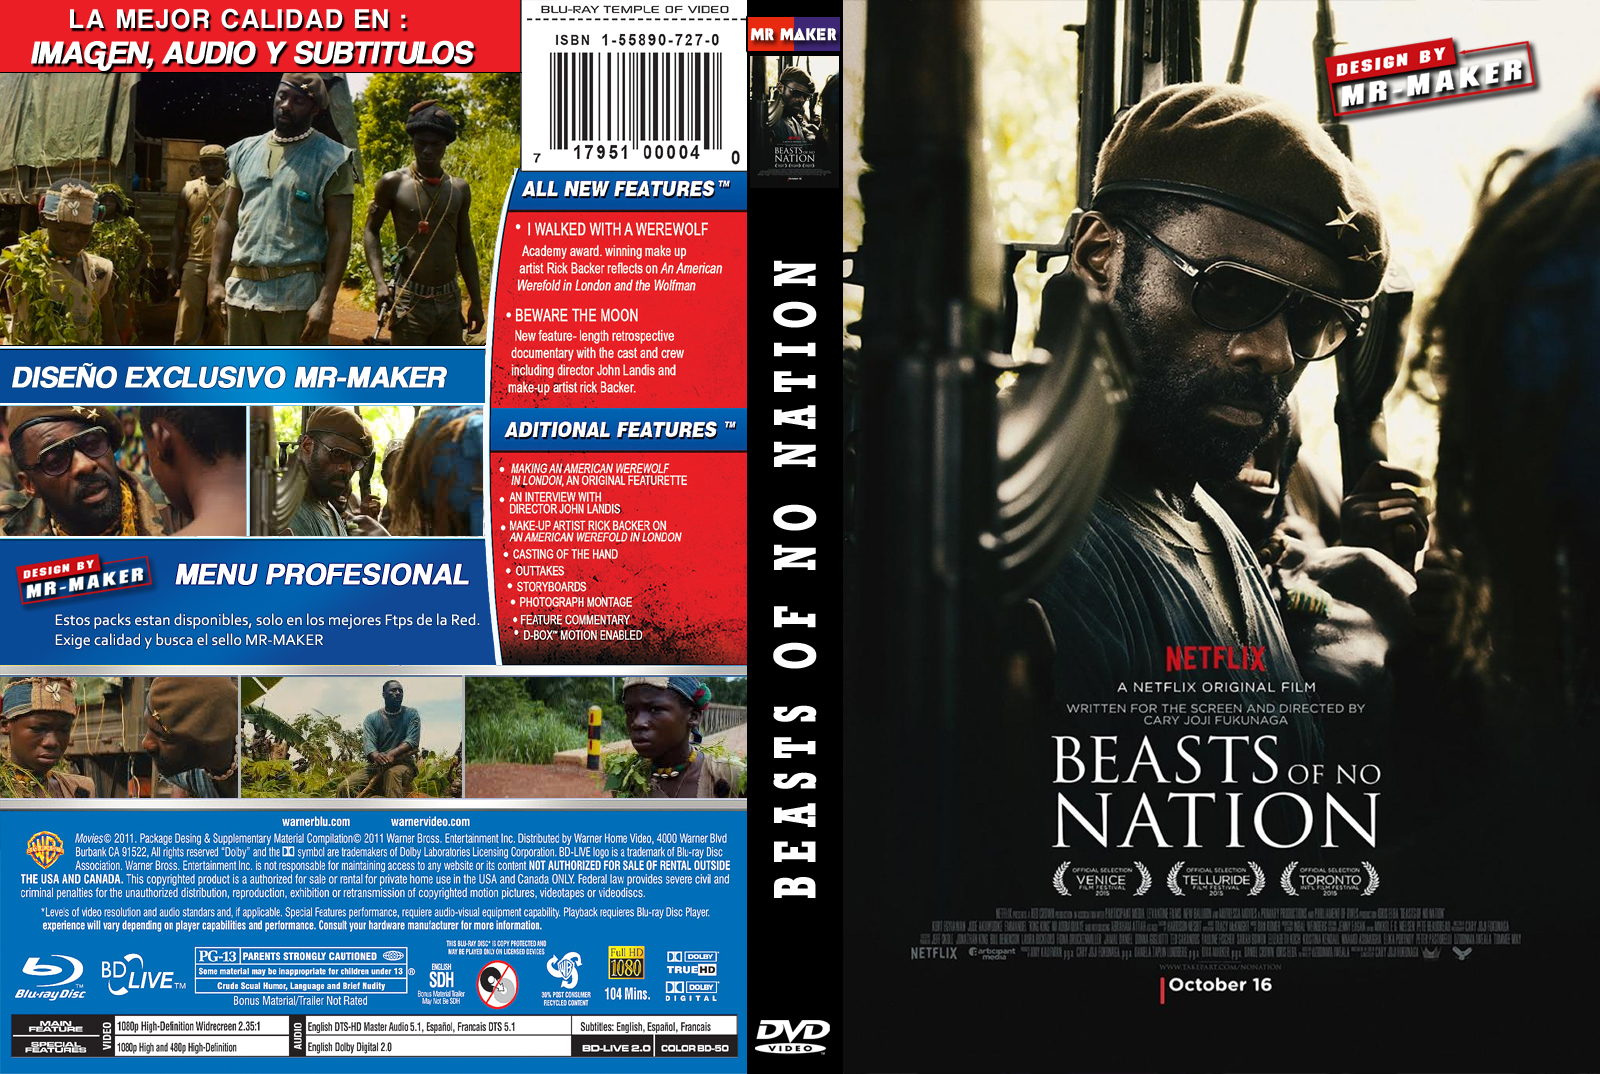 Beasts Of No Nation 2015 DVD COVER COVERGOODPELIS